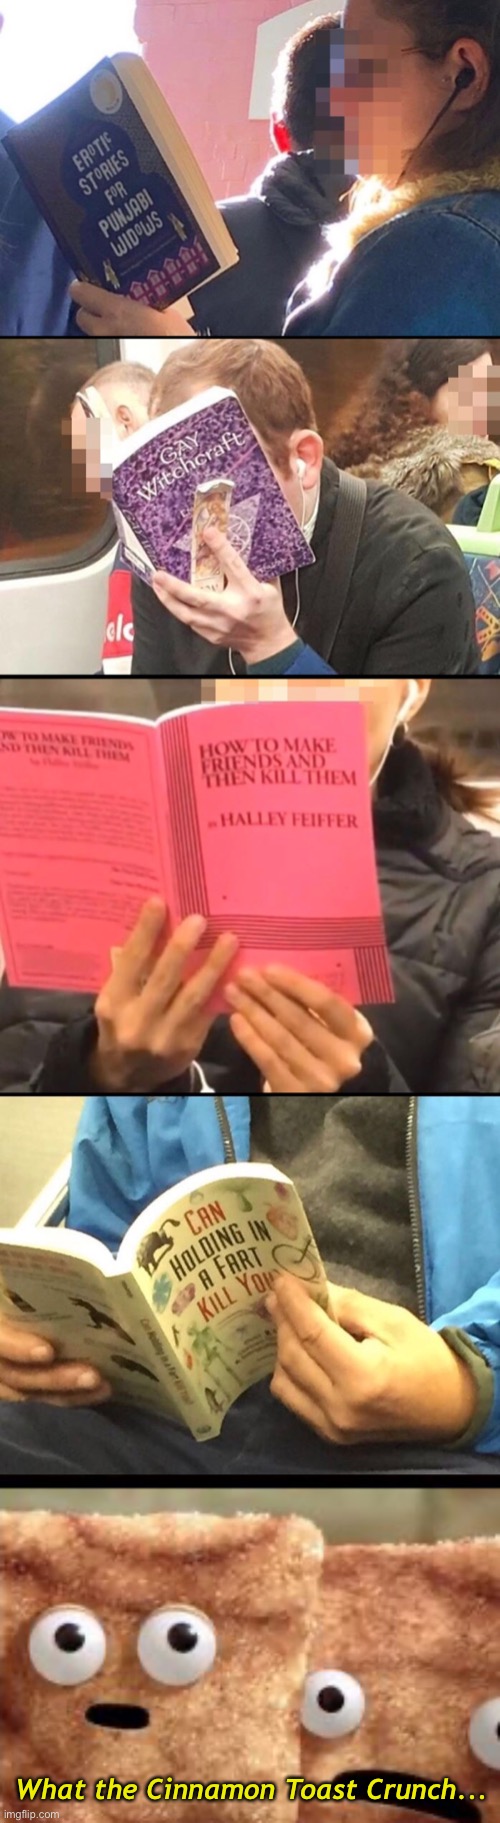 Are You Really Reading That Book in Public? | What the Cinnamon Toast Crunch... | image tagged in funny memes,reading,book titles,what the cinnamon toast f is this | made w/ Imgflip meme maker